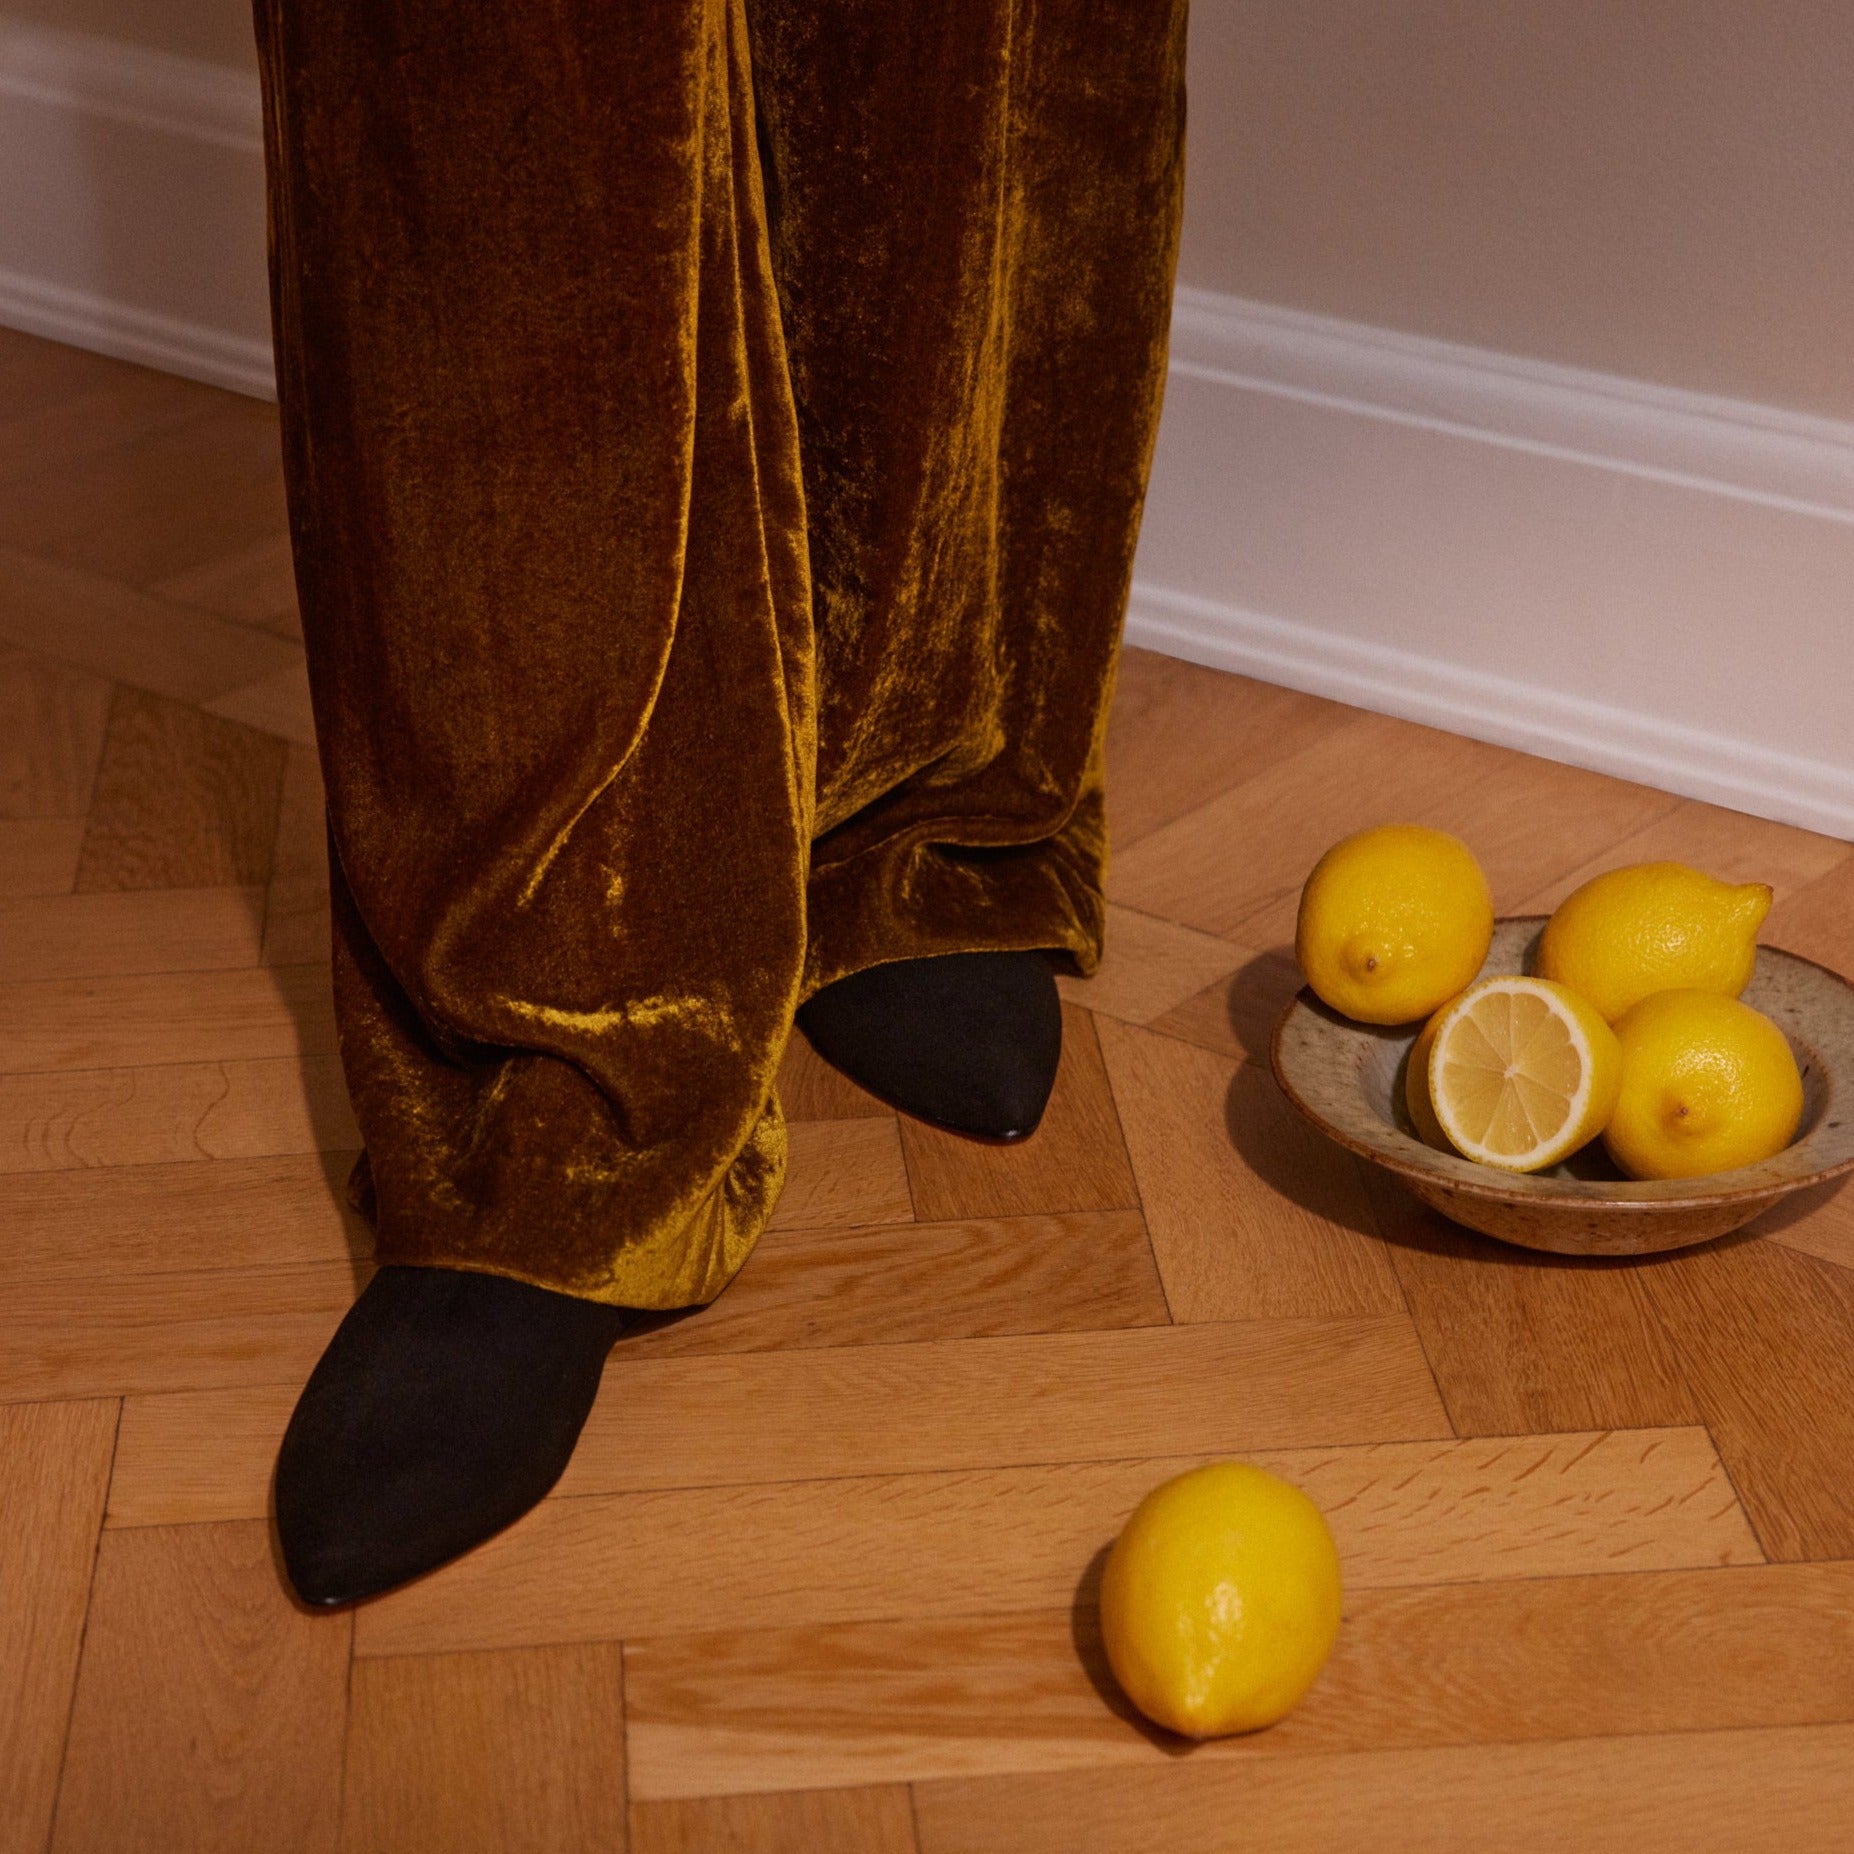 Inabo Women's Slider slipper in black suede worn by a women i velvet pants standing on a wooden floor with a bowl of lemons beside her 